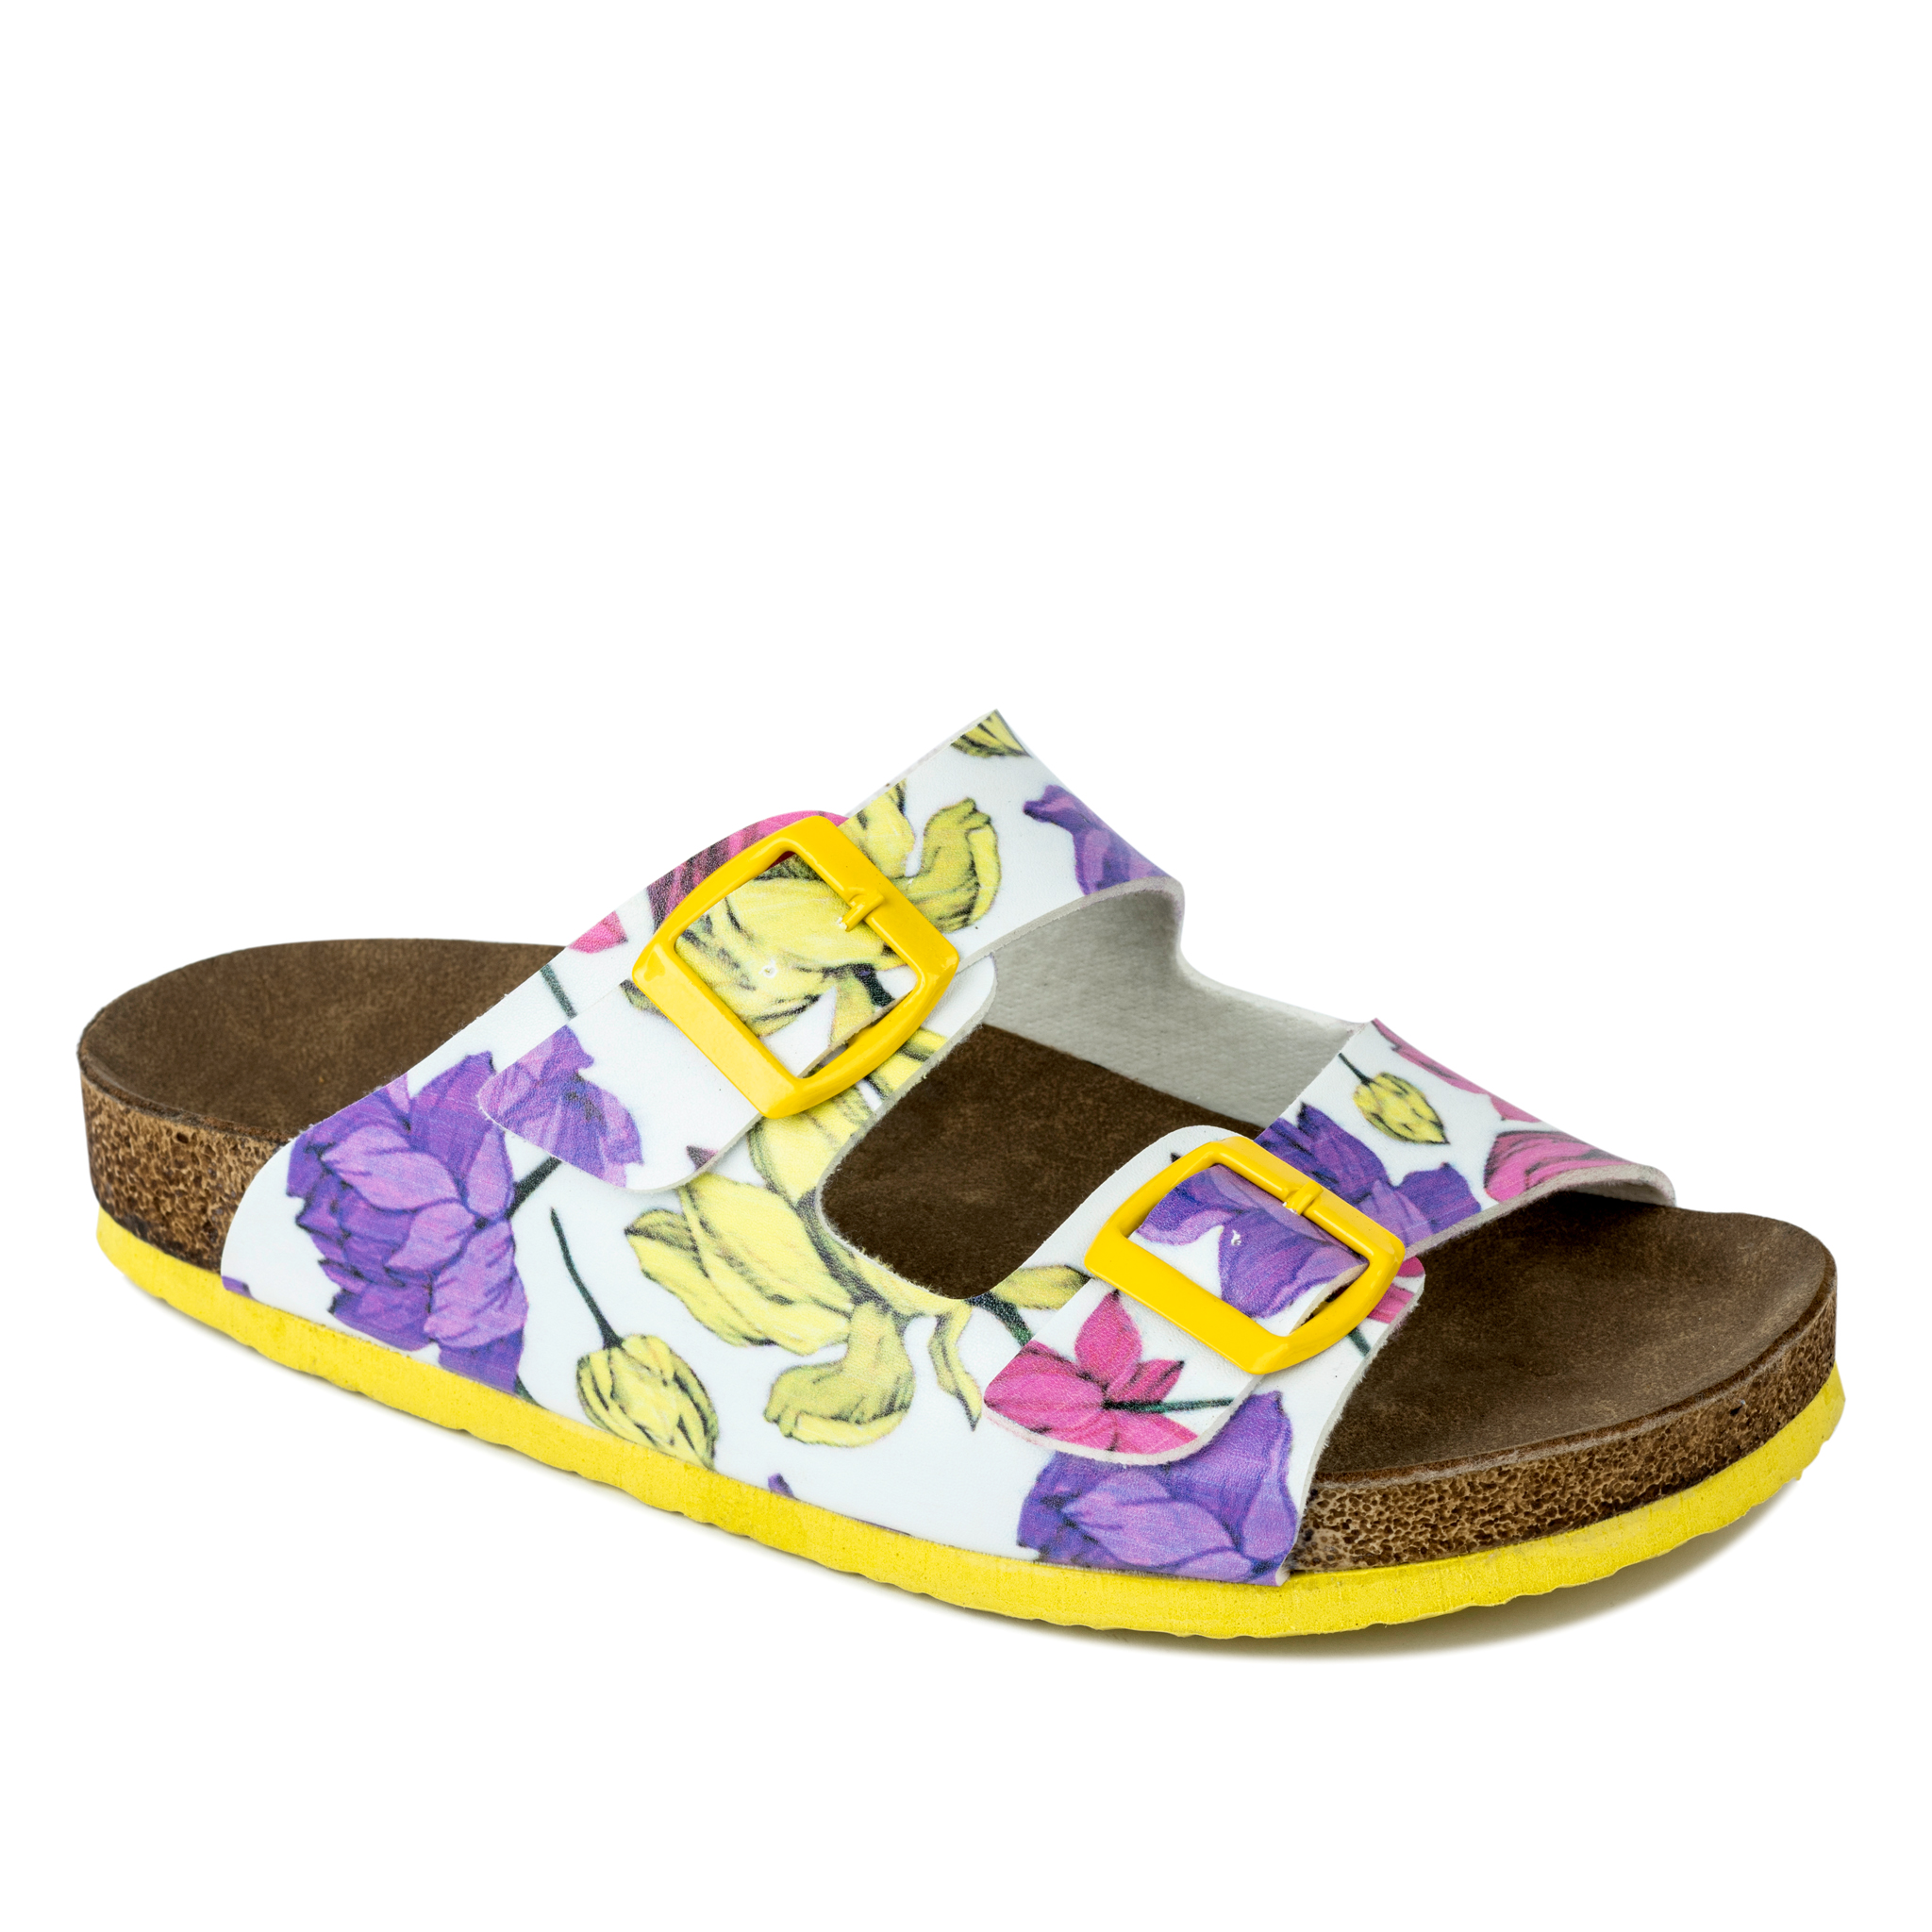 FLAT SLIPPERS WITH BELTS AND FLOWER PRINT - WHITE/YELLOW